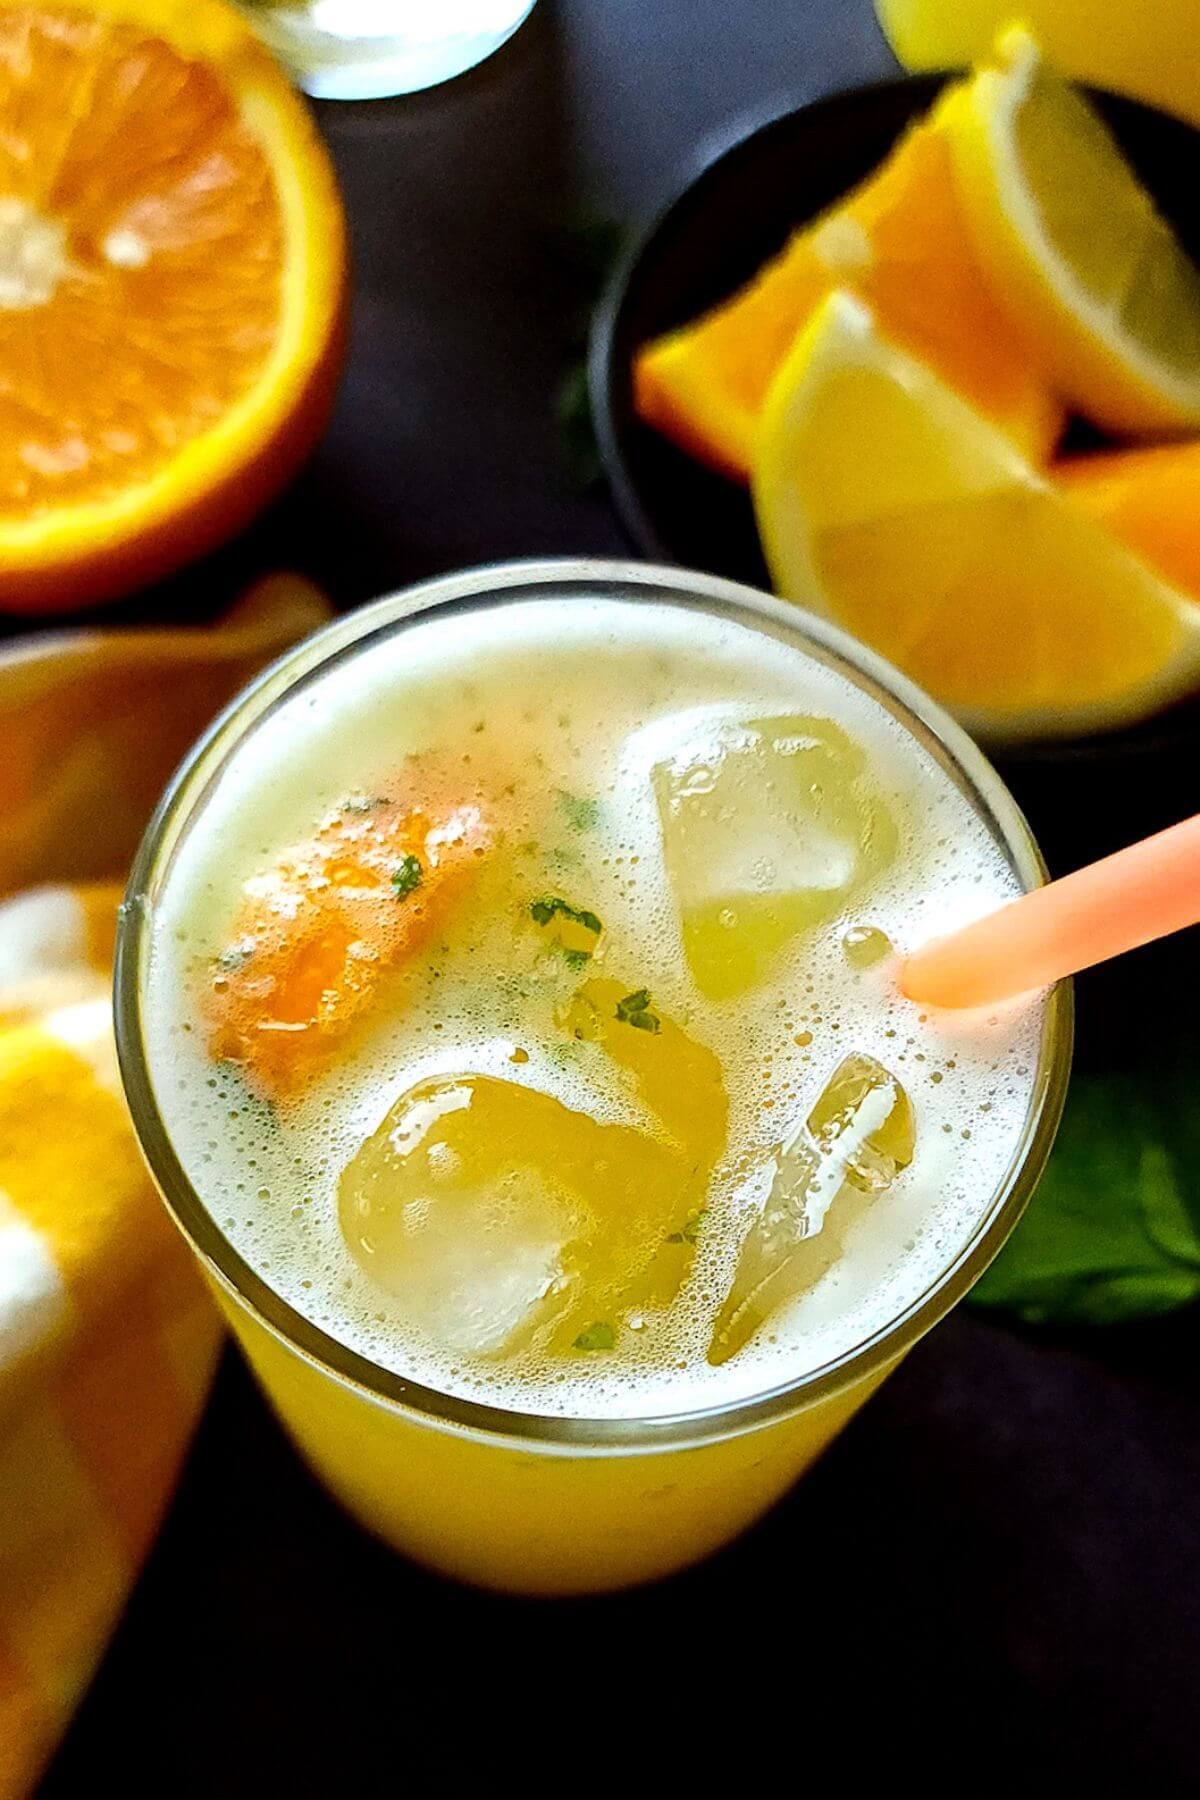 A glass of homemade orange lemonade with orange wedges in the background.